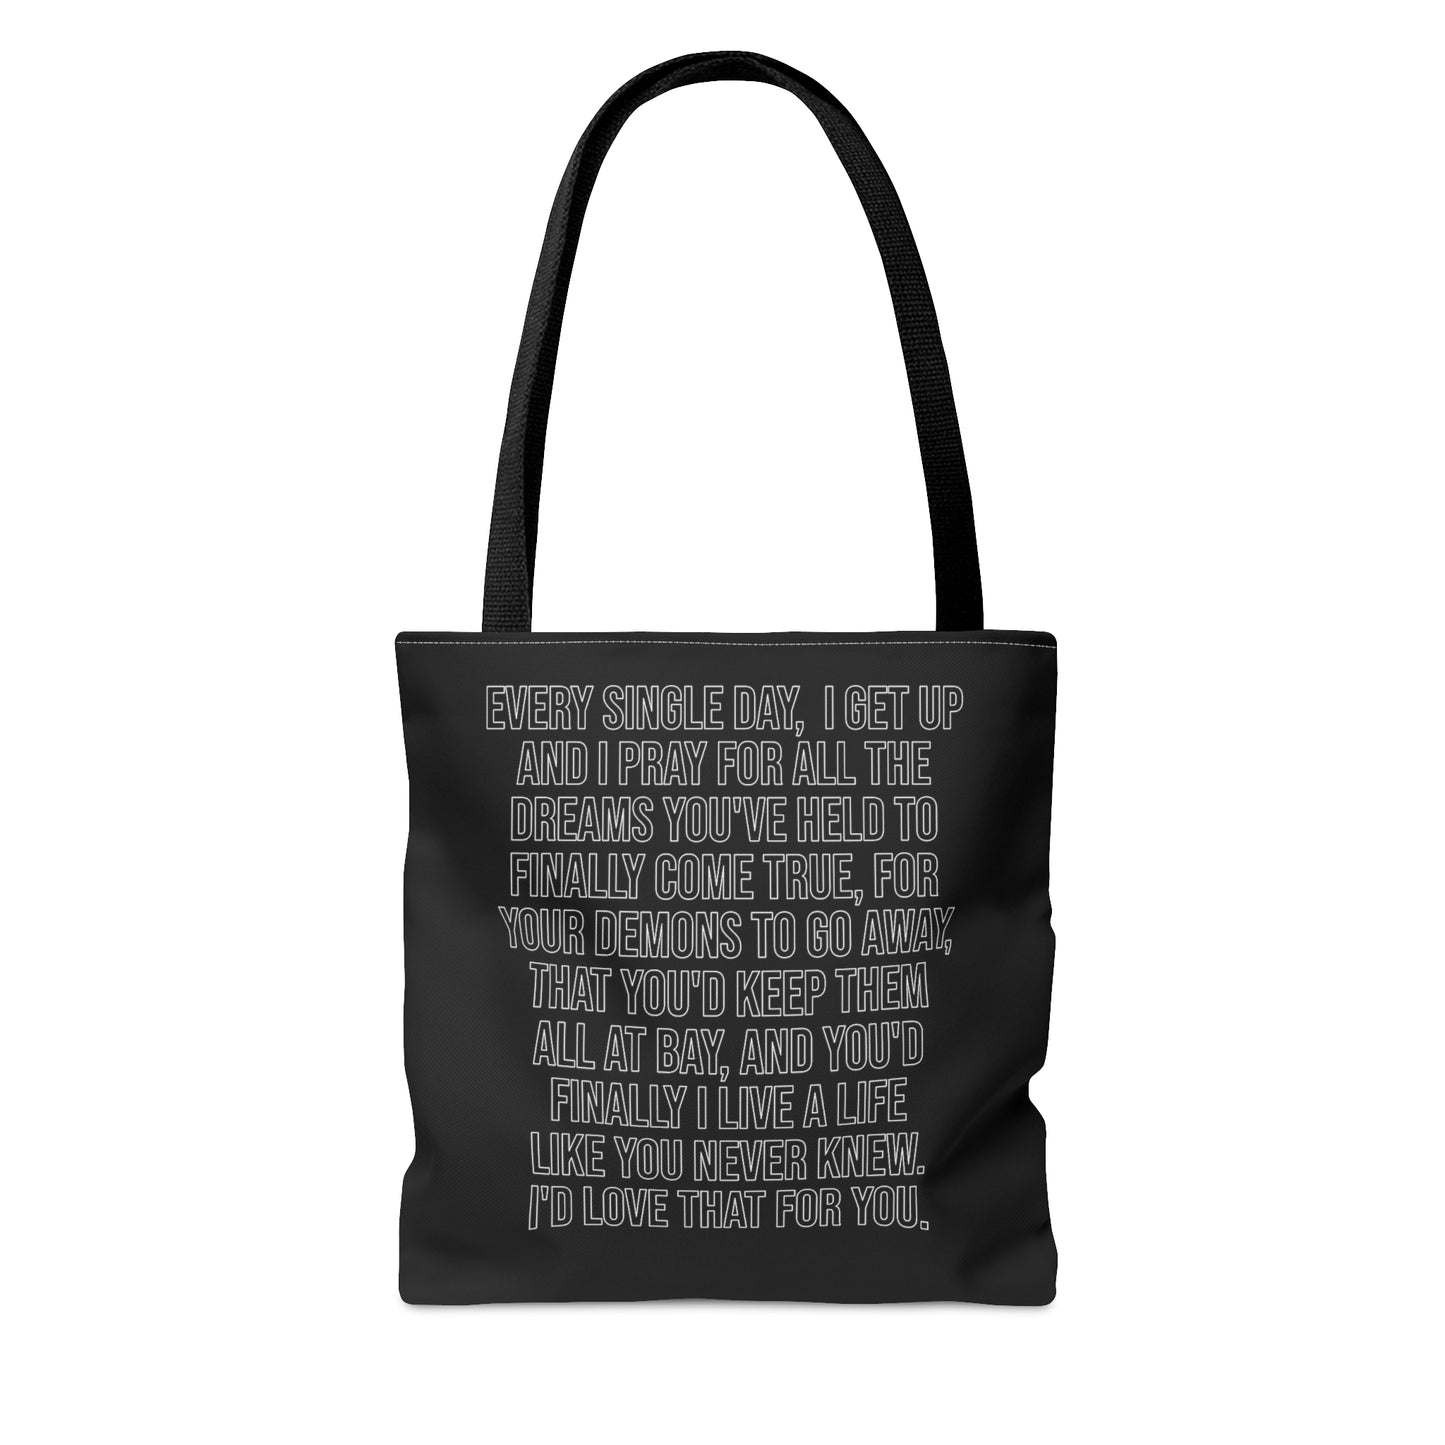 "I Love That For You" Tote Bag (AOP)